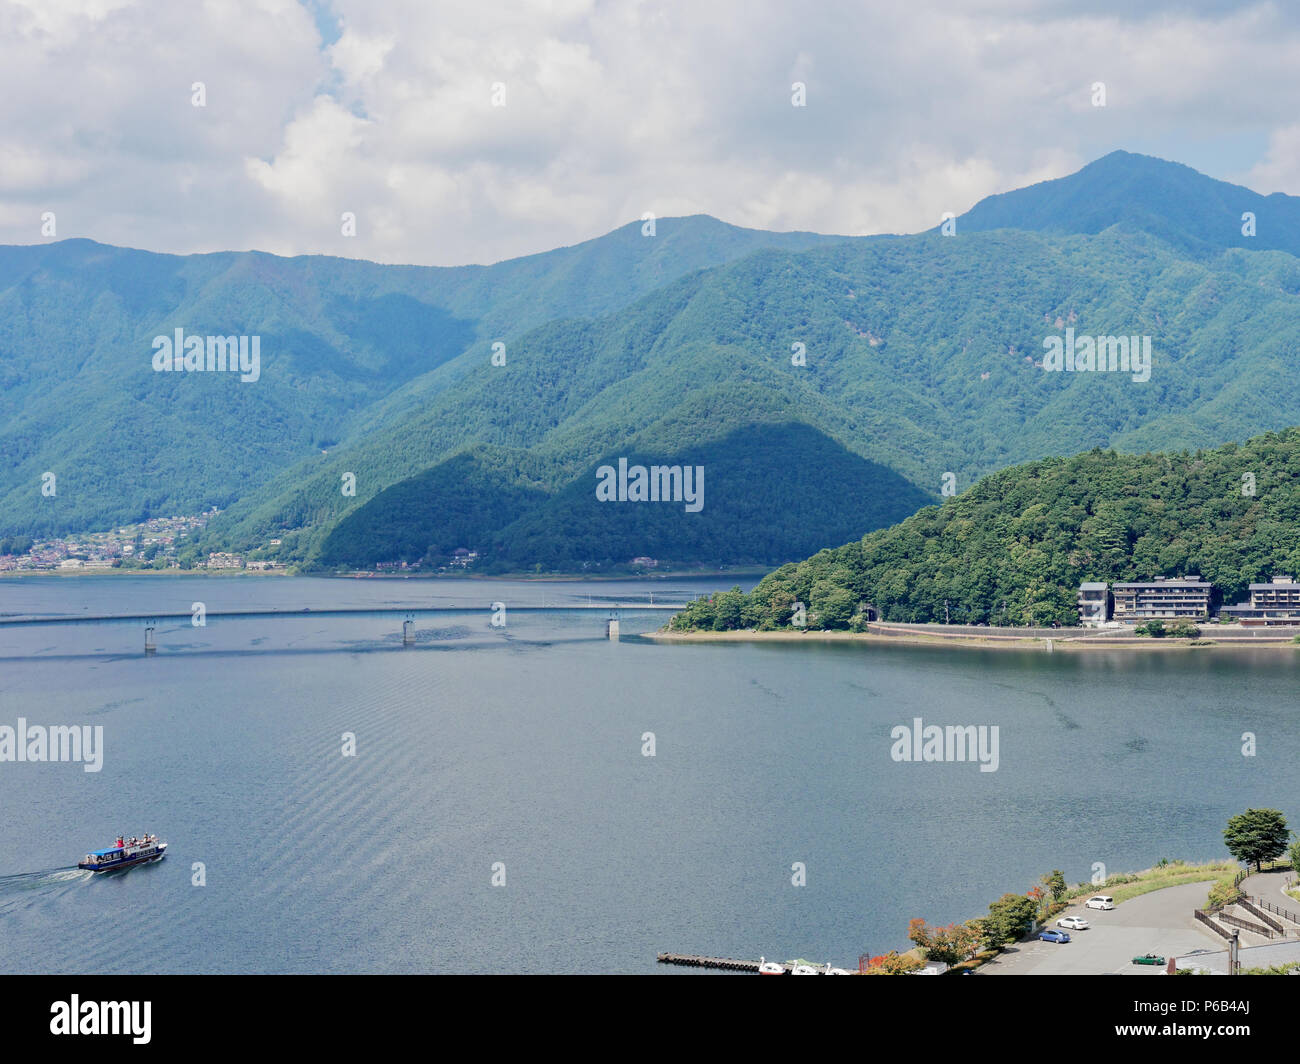 Scenery of Lake Kawaguchi, the biggest lake of Fuji five lakes, with a ferry boat and an overwater bridge crossing the lake and mt Kurodake on the background, famous tourist destination in Japan Stock Photo